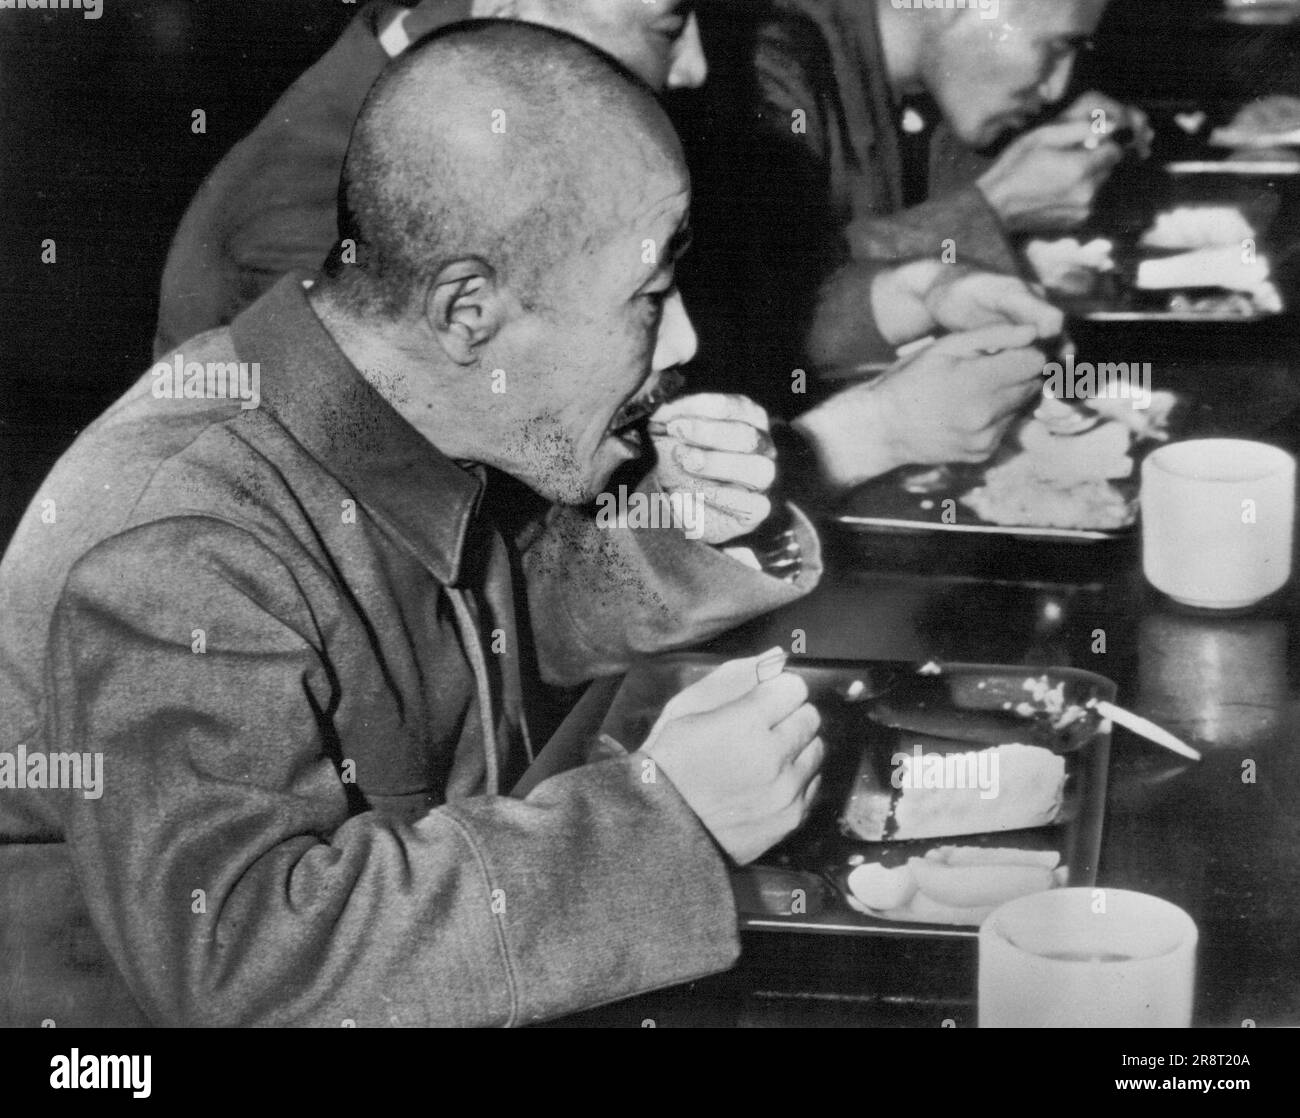 Tojo has Lunch -- Former Japanese premier Hideki Tojo eats a 'GI' lunch during recess in the trial of former highranking Japanese officials accused of war crimes in Tokyo. Tojo is the only defendant who still wears his uniform. October 18, 1947. (Photo by AP Wirephoto). Stock Photo